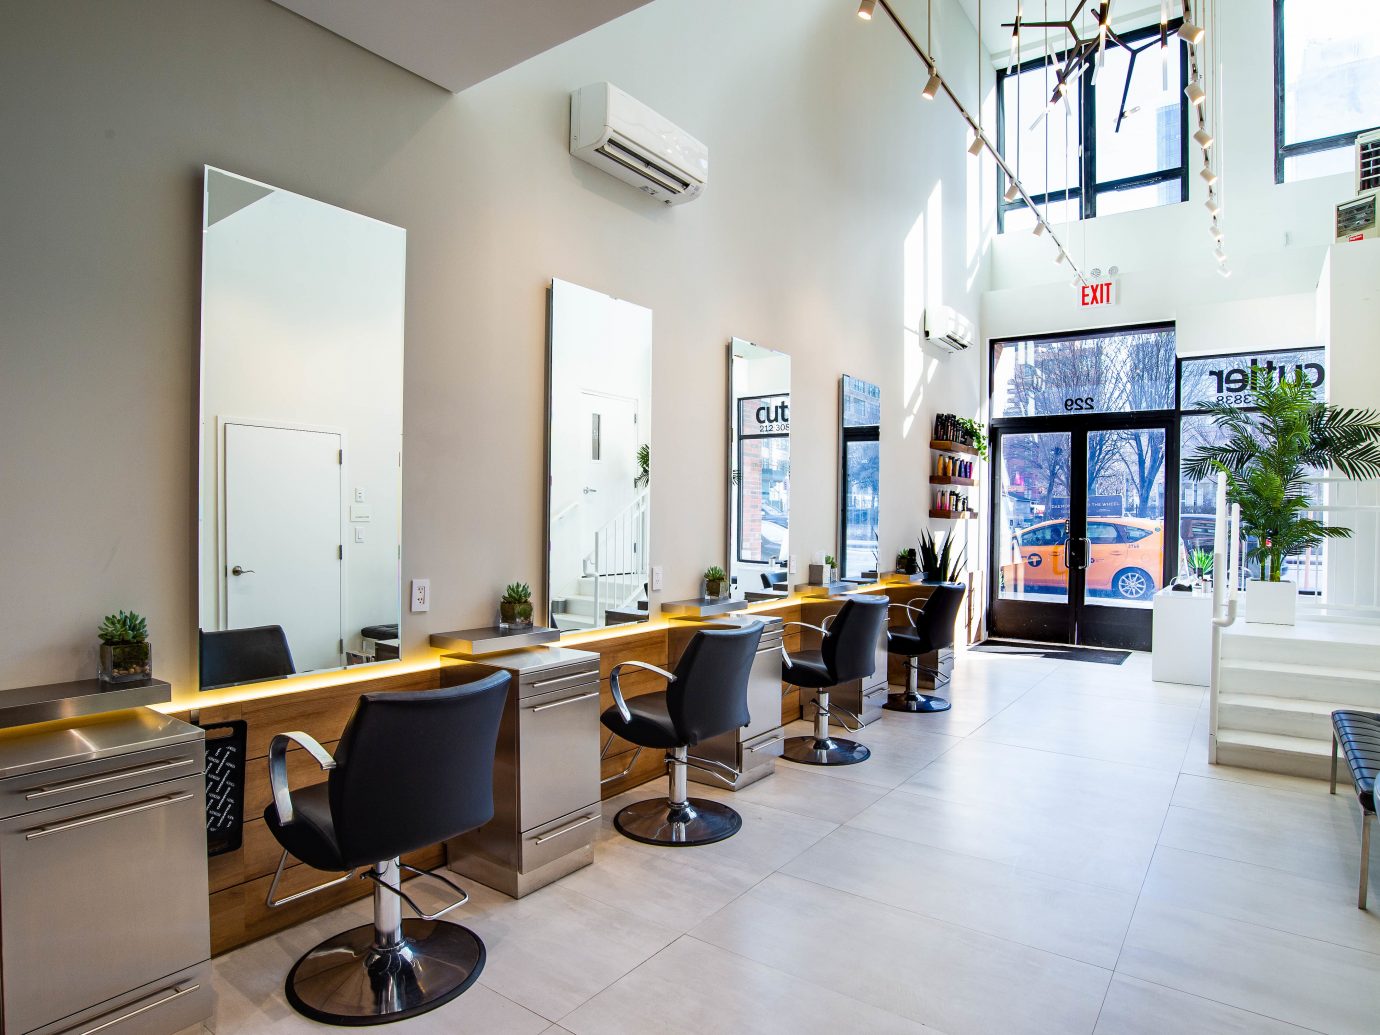 10. "The Top Salons for an Icy Blonde Hair Transformation Near You" - wide 9